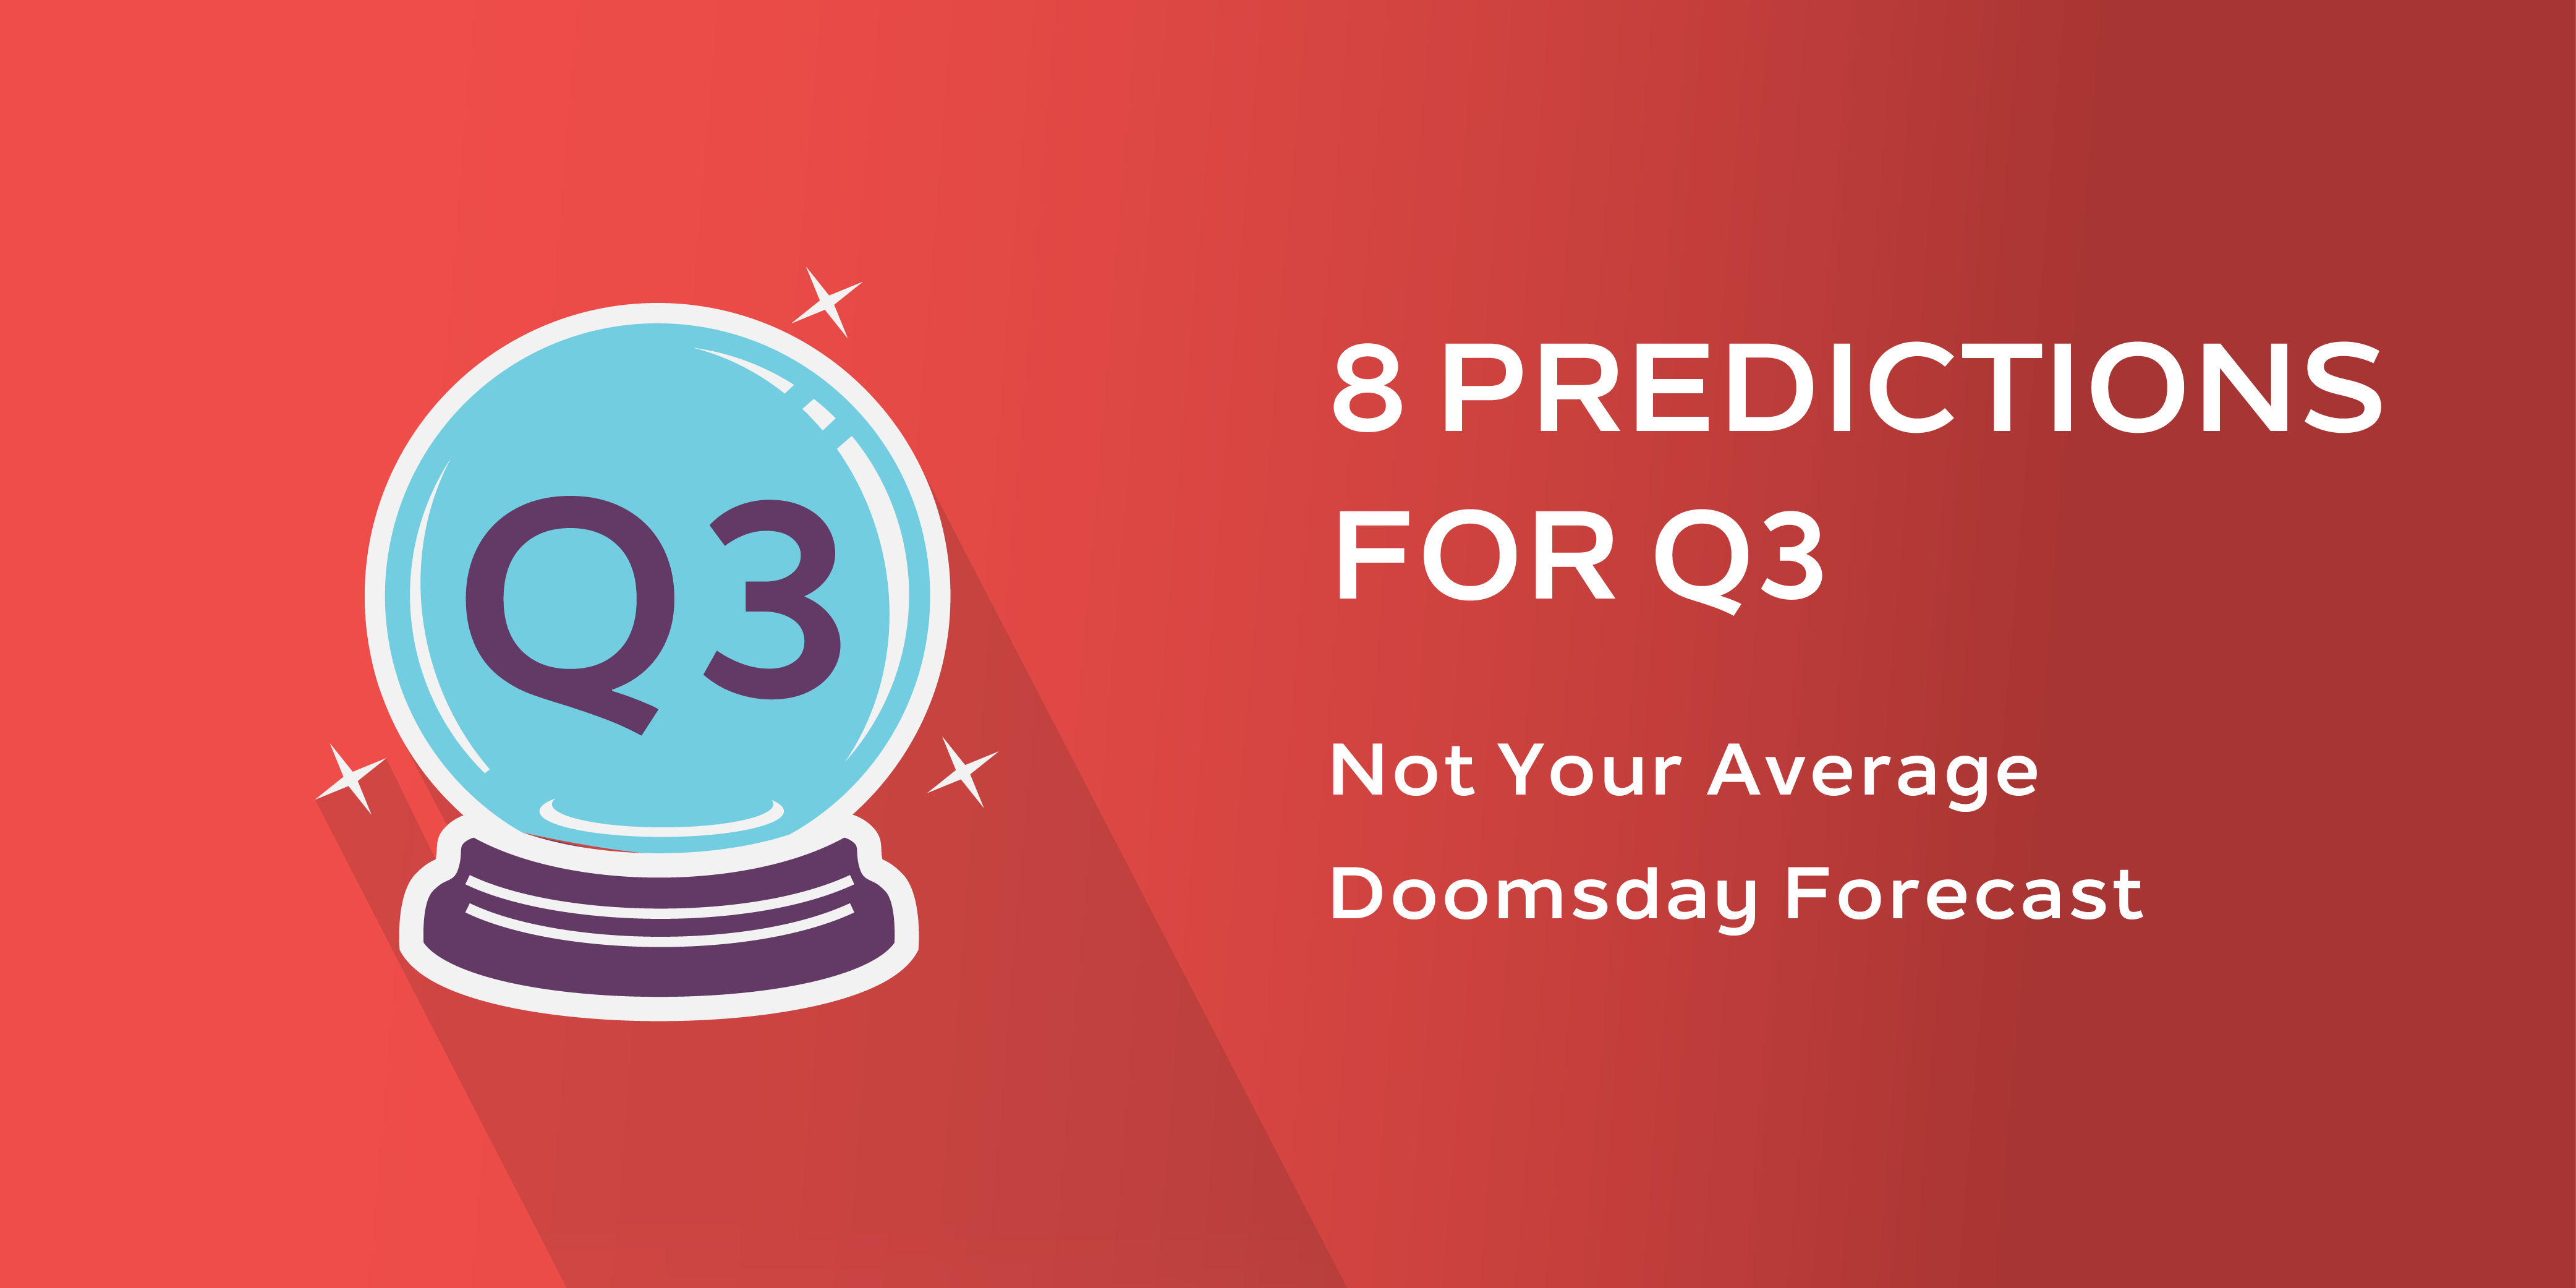 8 Predictions for Q3